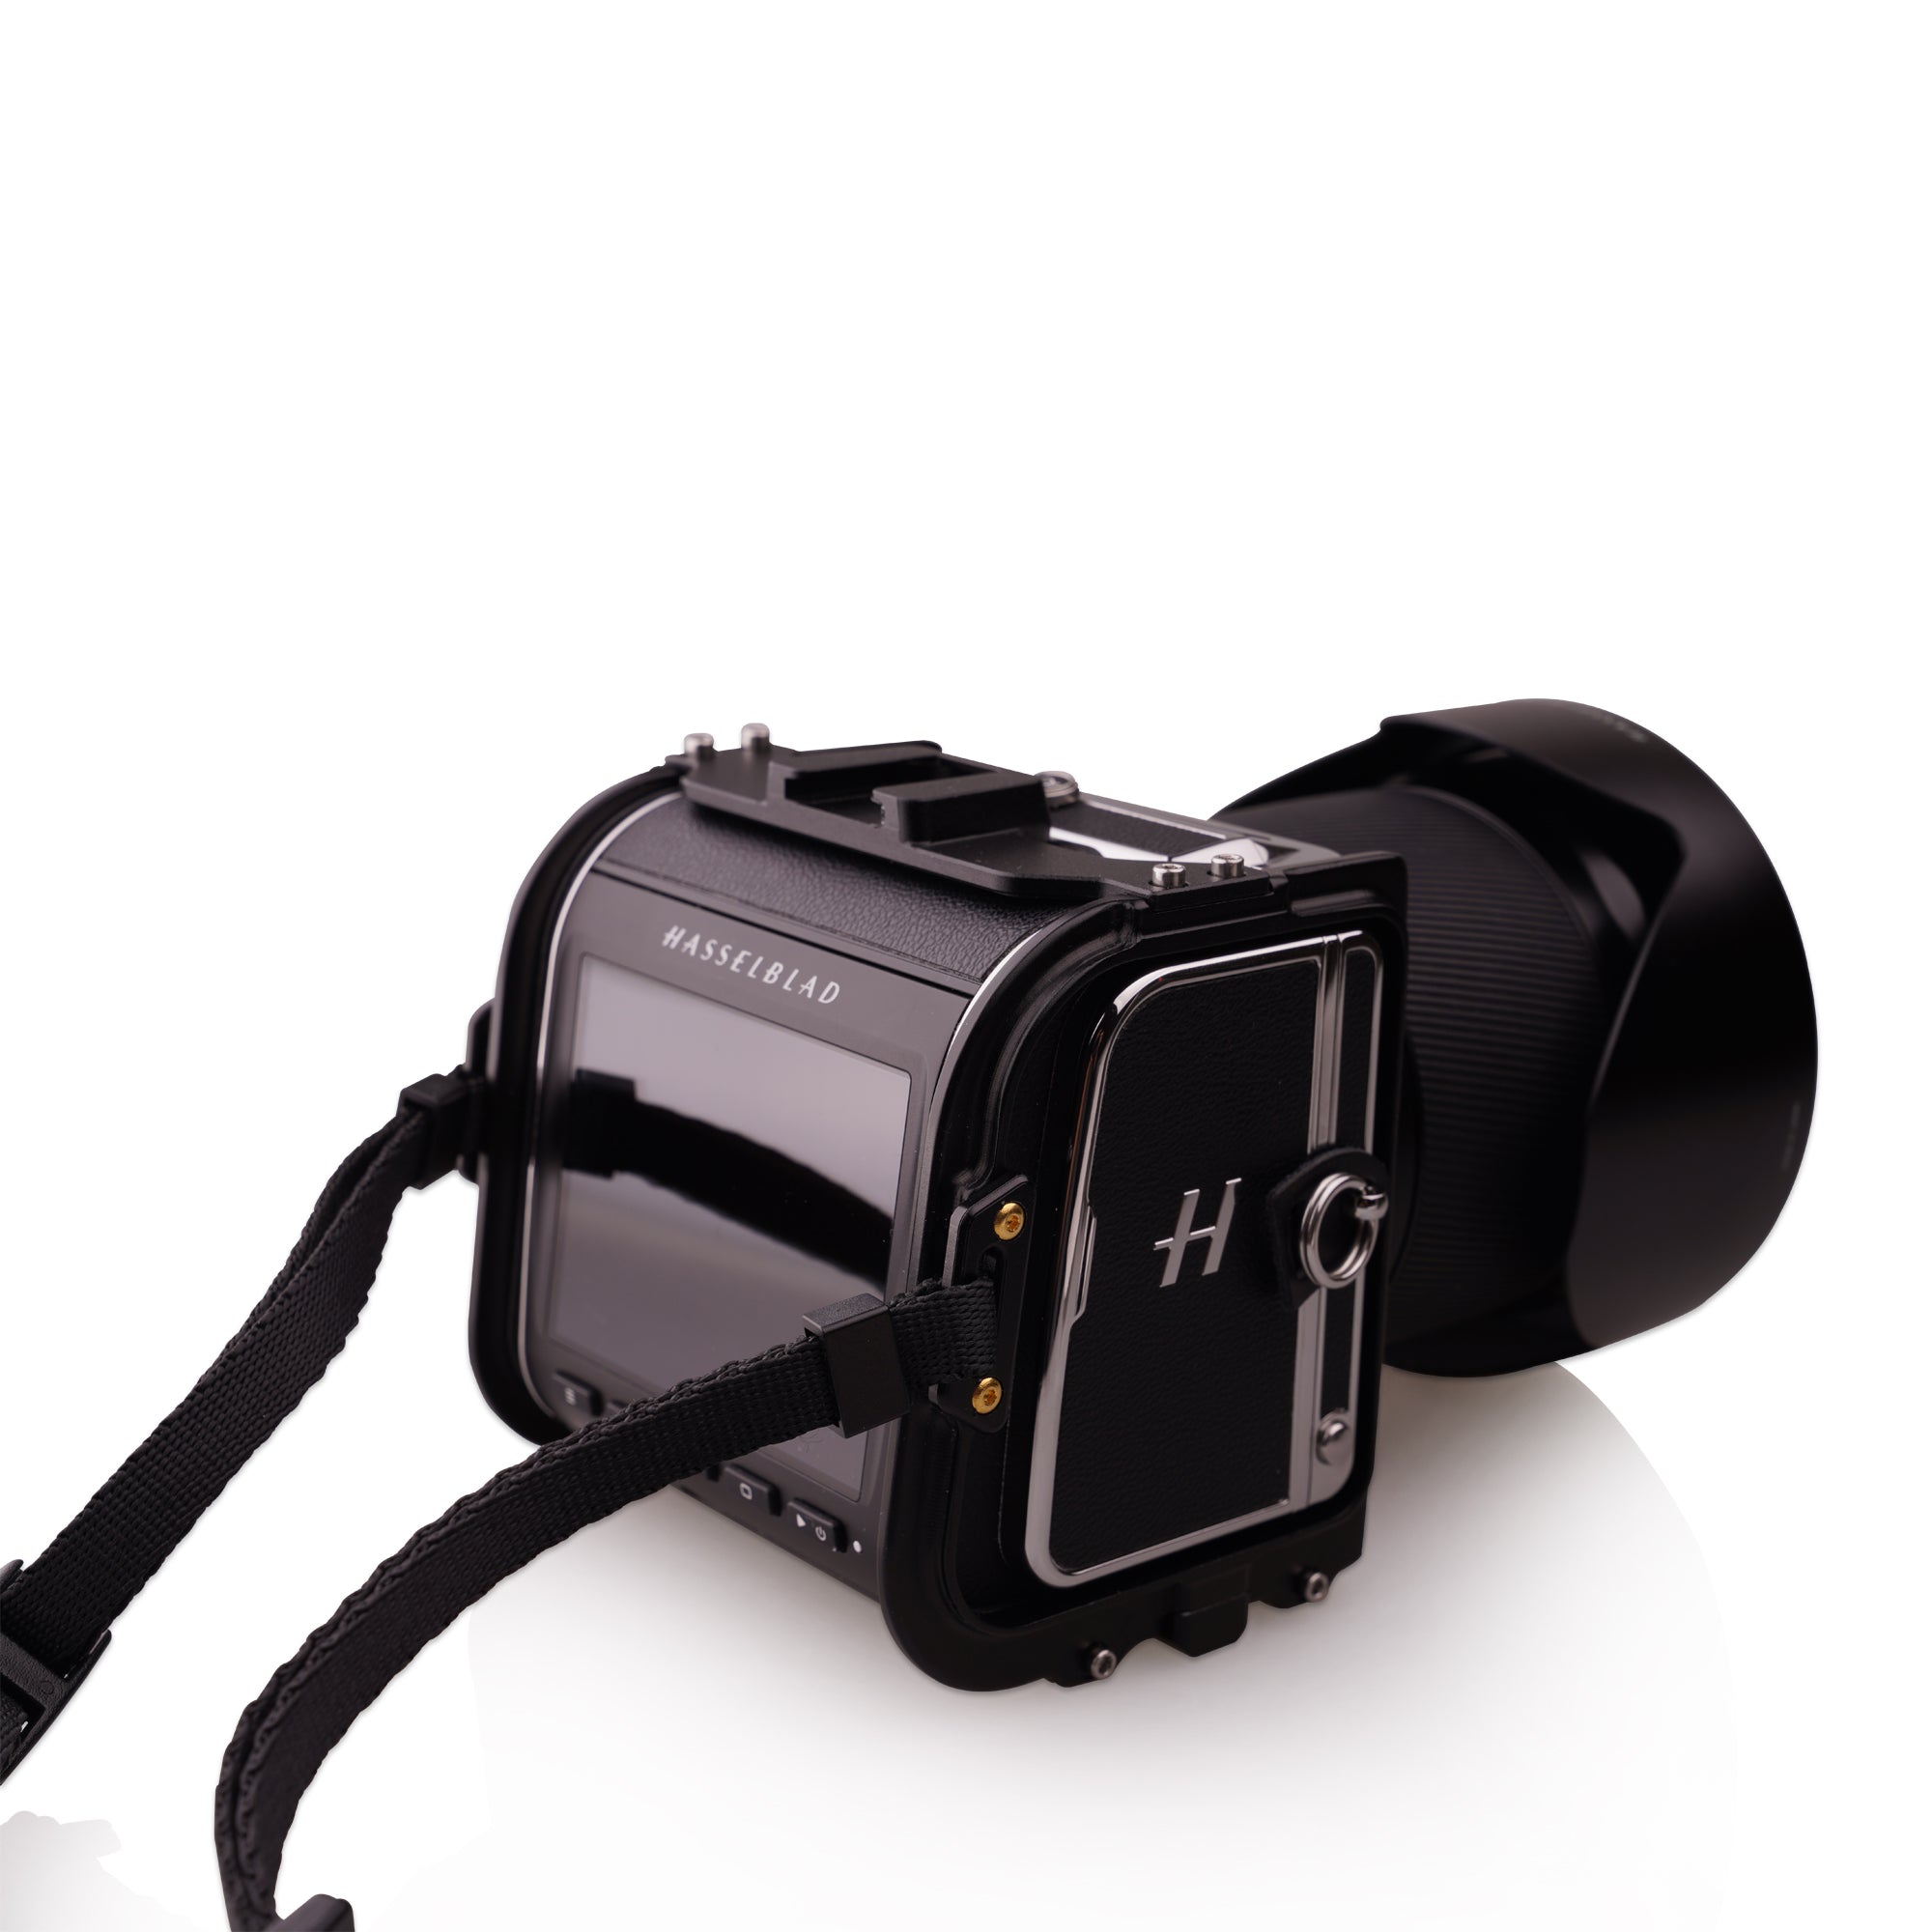 Lanhorse Camera Cage for Hasselblad 907x, 2nd Generation. Ultra-thin, ultra-light, portable. No Wood Handle.